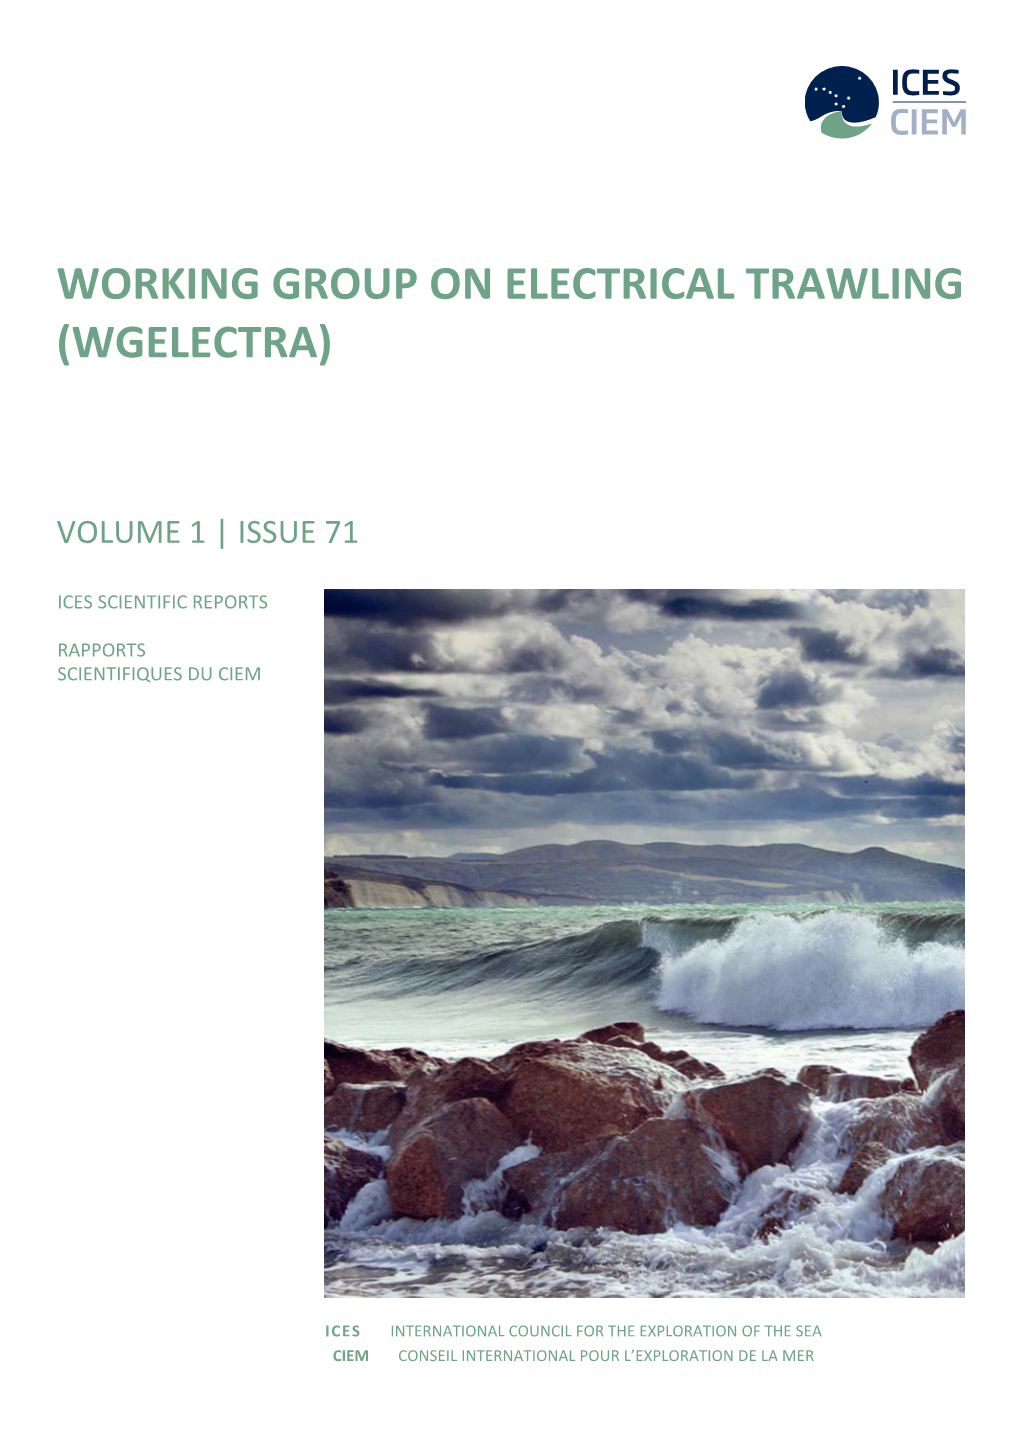 Working Group on Electrical Trawling (Wgelectra)